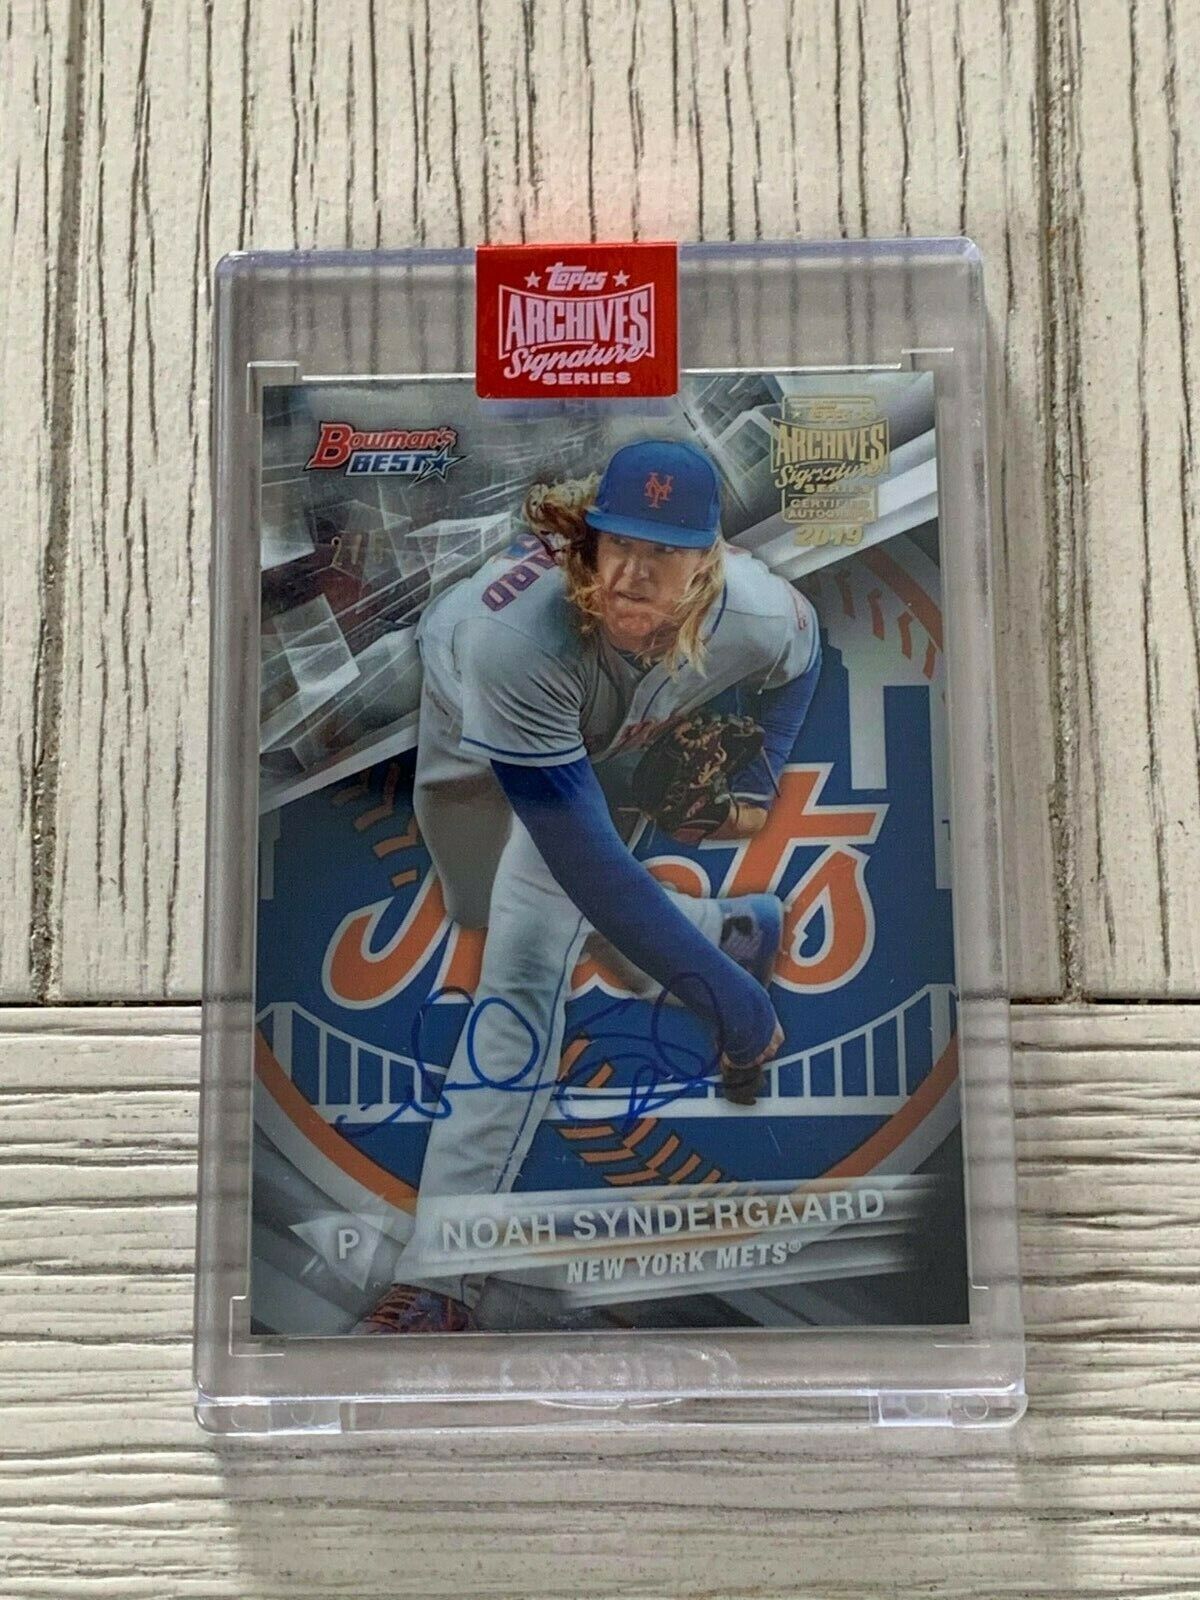 Noah Syndergaard autographed signed Card New York Mets Topps Archives 2/5